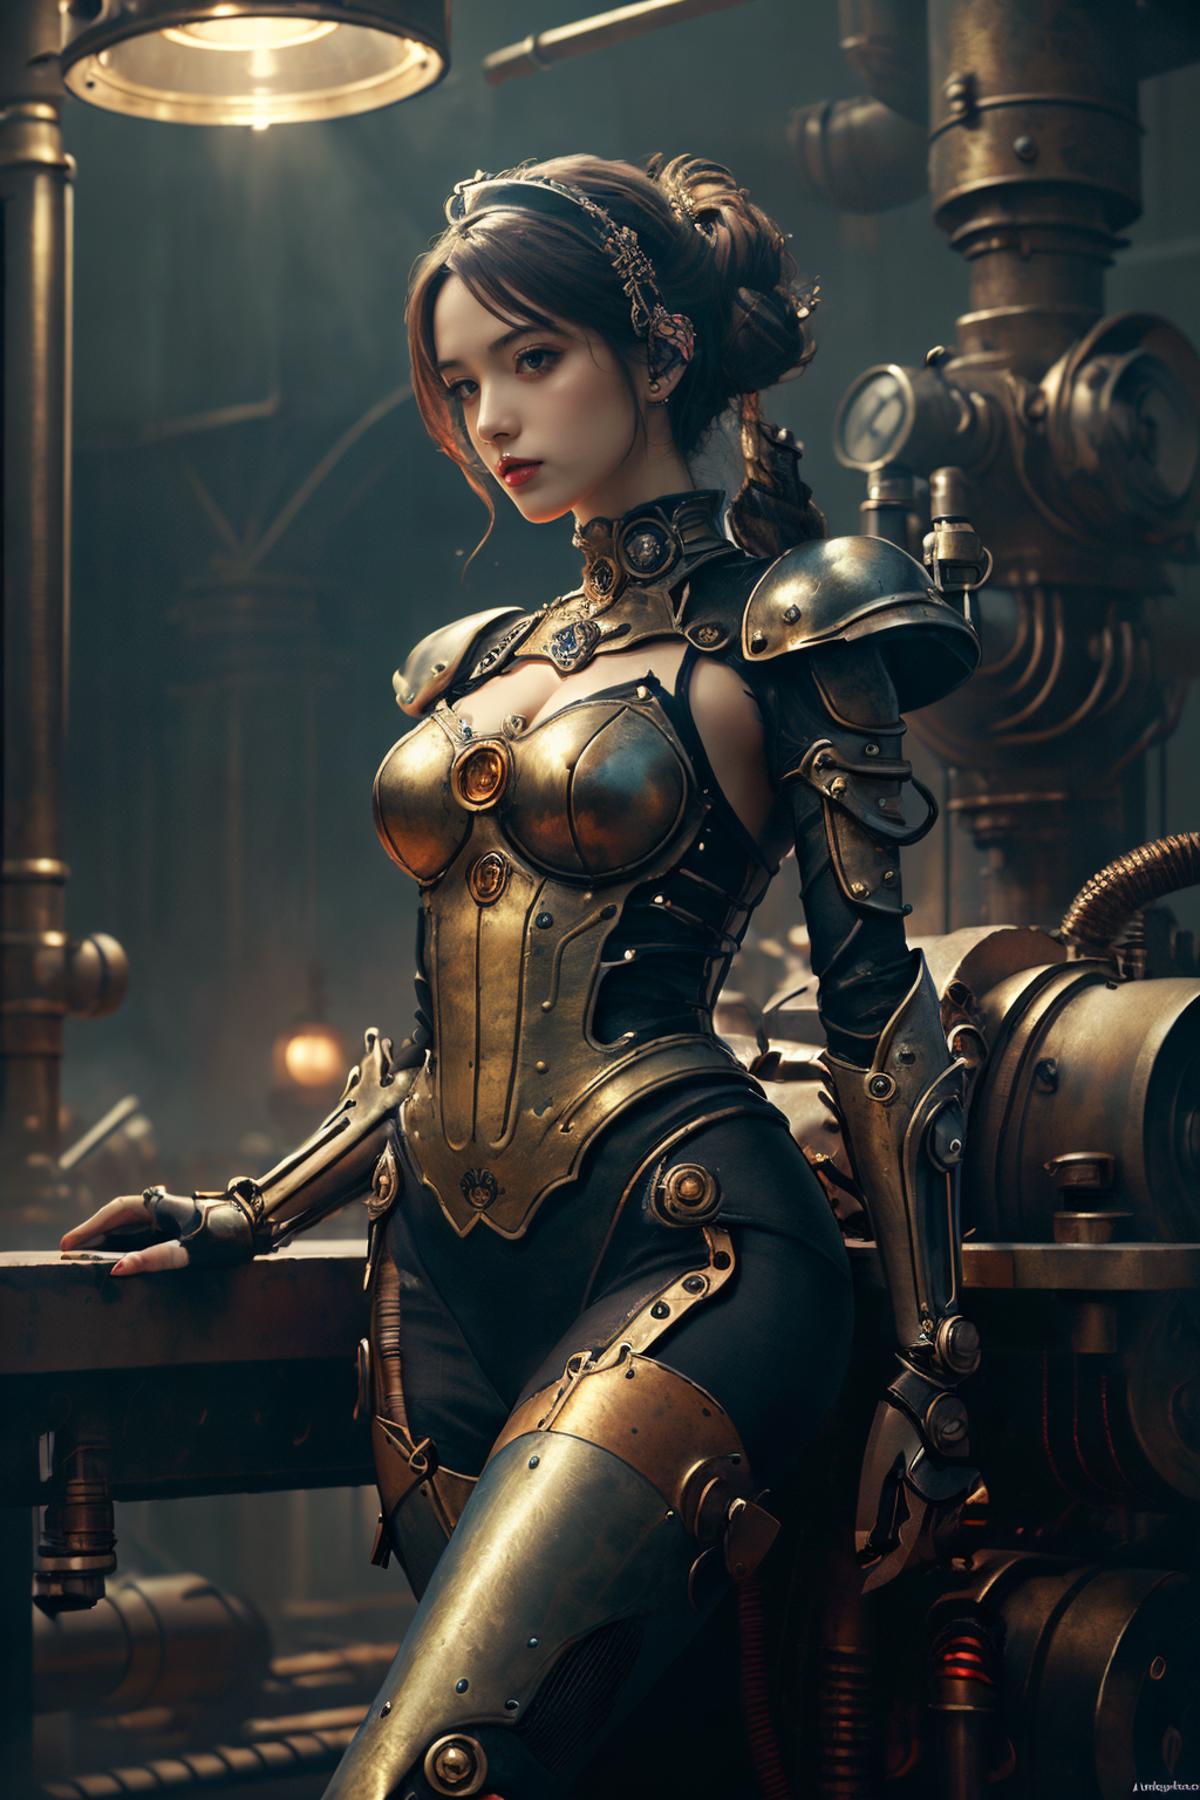 A woman wearing a gold metal corset and black pants, posing by a machine.